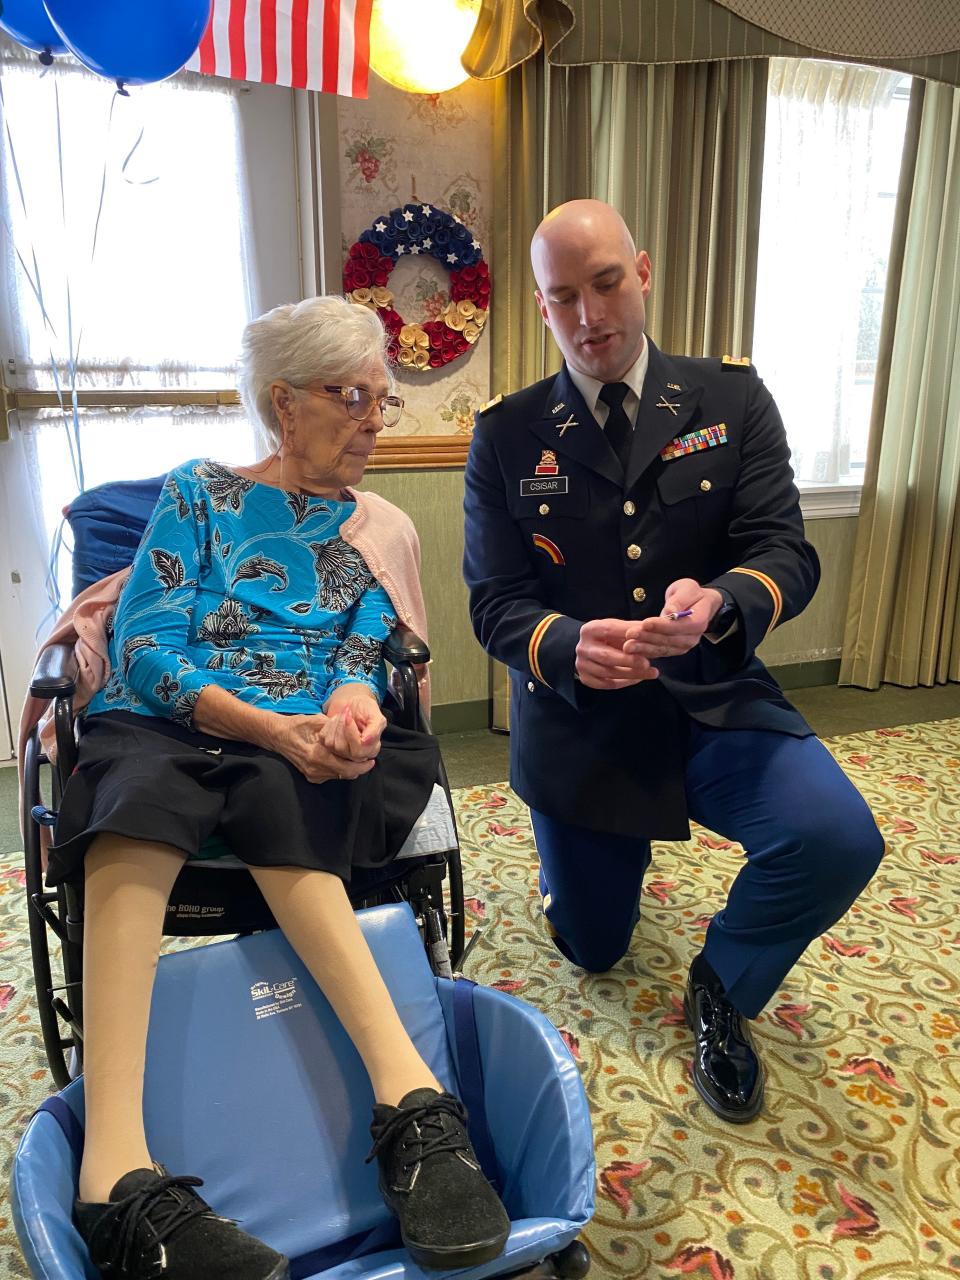 R.I. Army National Guard Capt. Michael Csisar visits Lucille Couture, Lawrence Robidoux’s 97-year-old sister, at Saint Antoine’s Residence in North Smithfield on April 23. On behalf of the secretary of the Army, he offered his condolences to the Robidoux family and presented Lucille with several posthumous awards, including the Prisoner of War Medal.